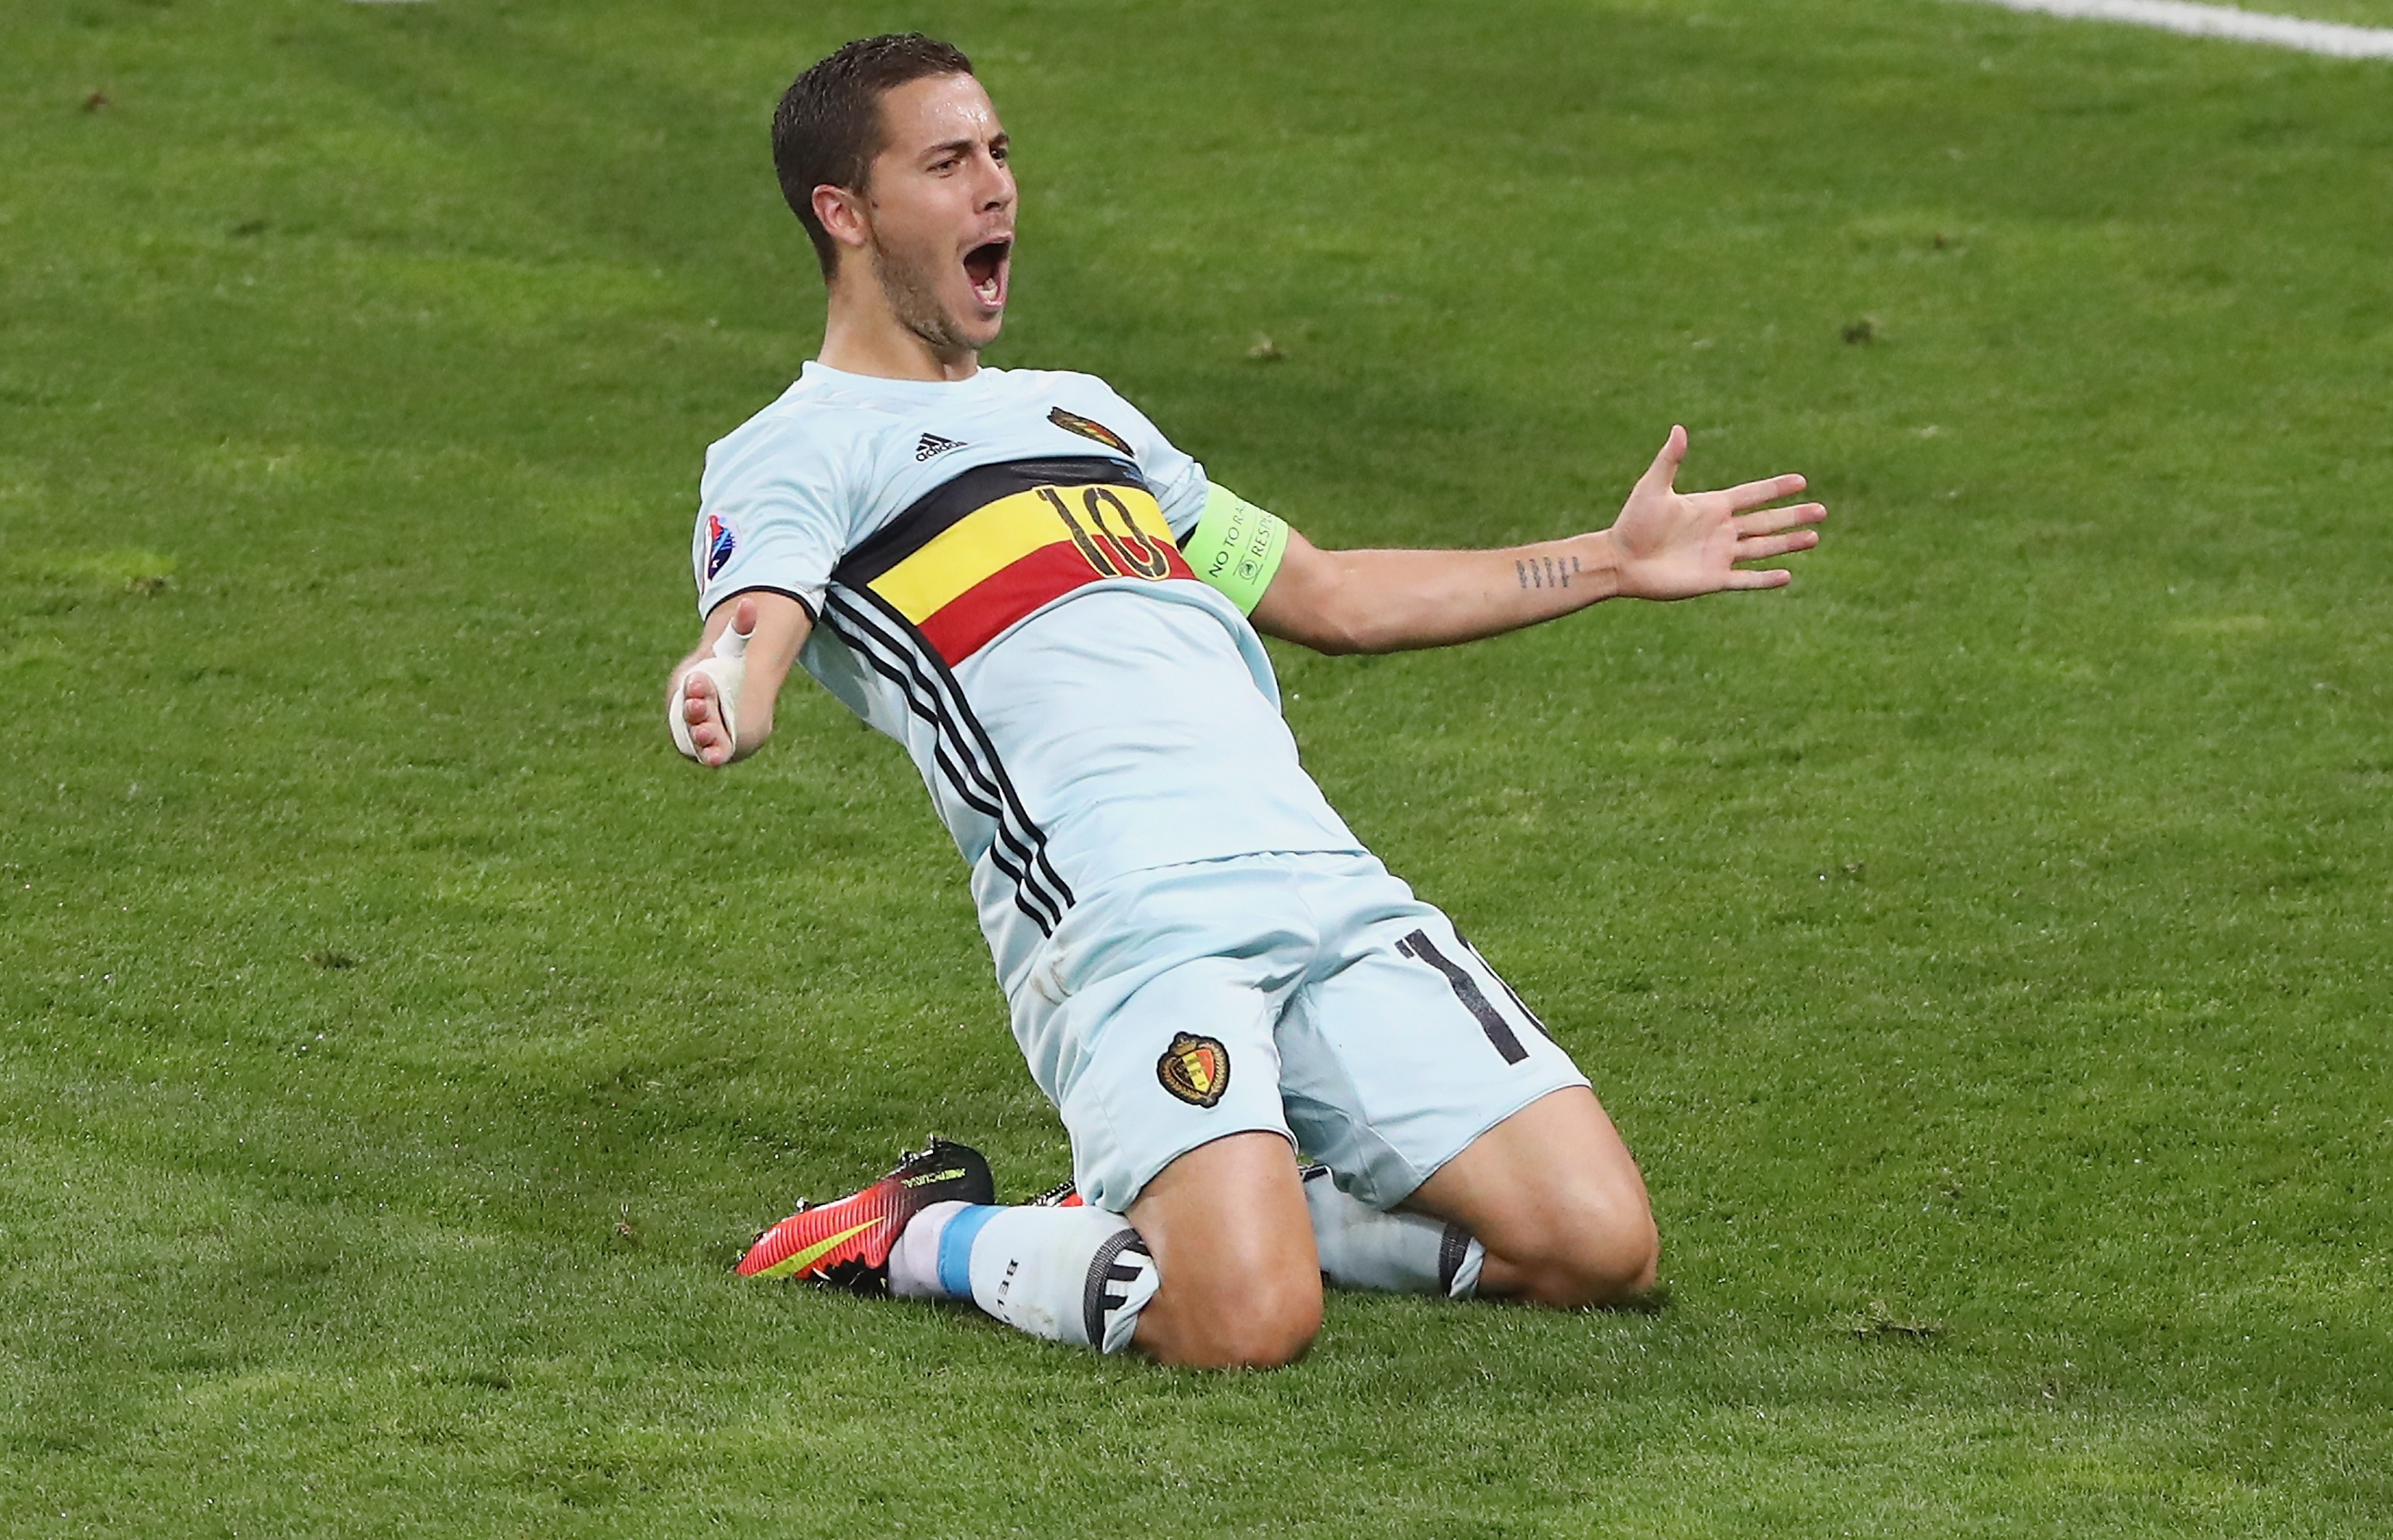 TOULOUSE, FRANCE - JUNE 26:  Eden Hazard of Belgium slides on his knees as he celebrates scoring his team's third goal during the UEFA EURO 2016 round of 16 match between Hungary and Belgium at Stadium Municipal on June 26, 2016 in Toulouse, France.  (Photo by Dean Mouhtaropoulos/Getty Images)